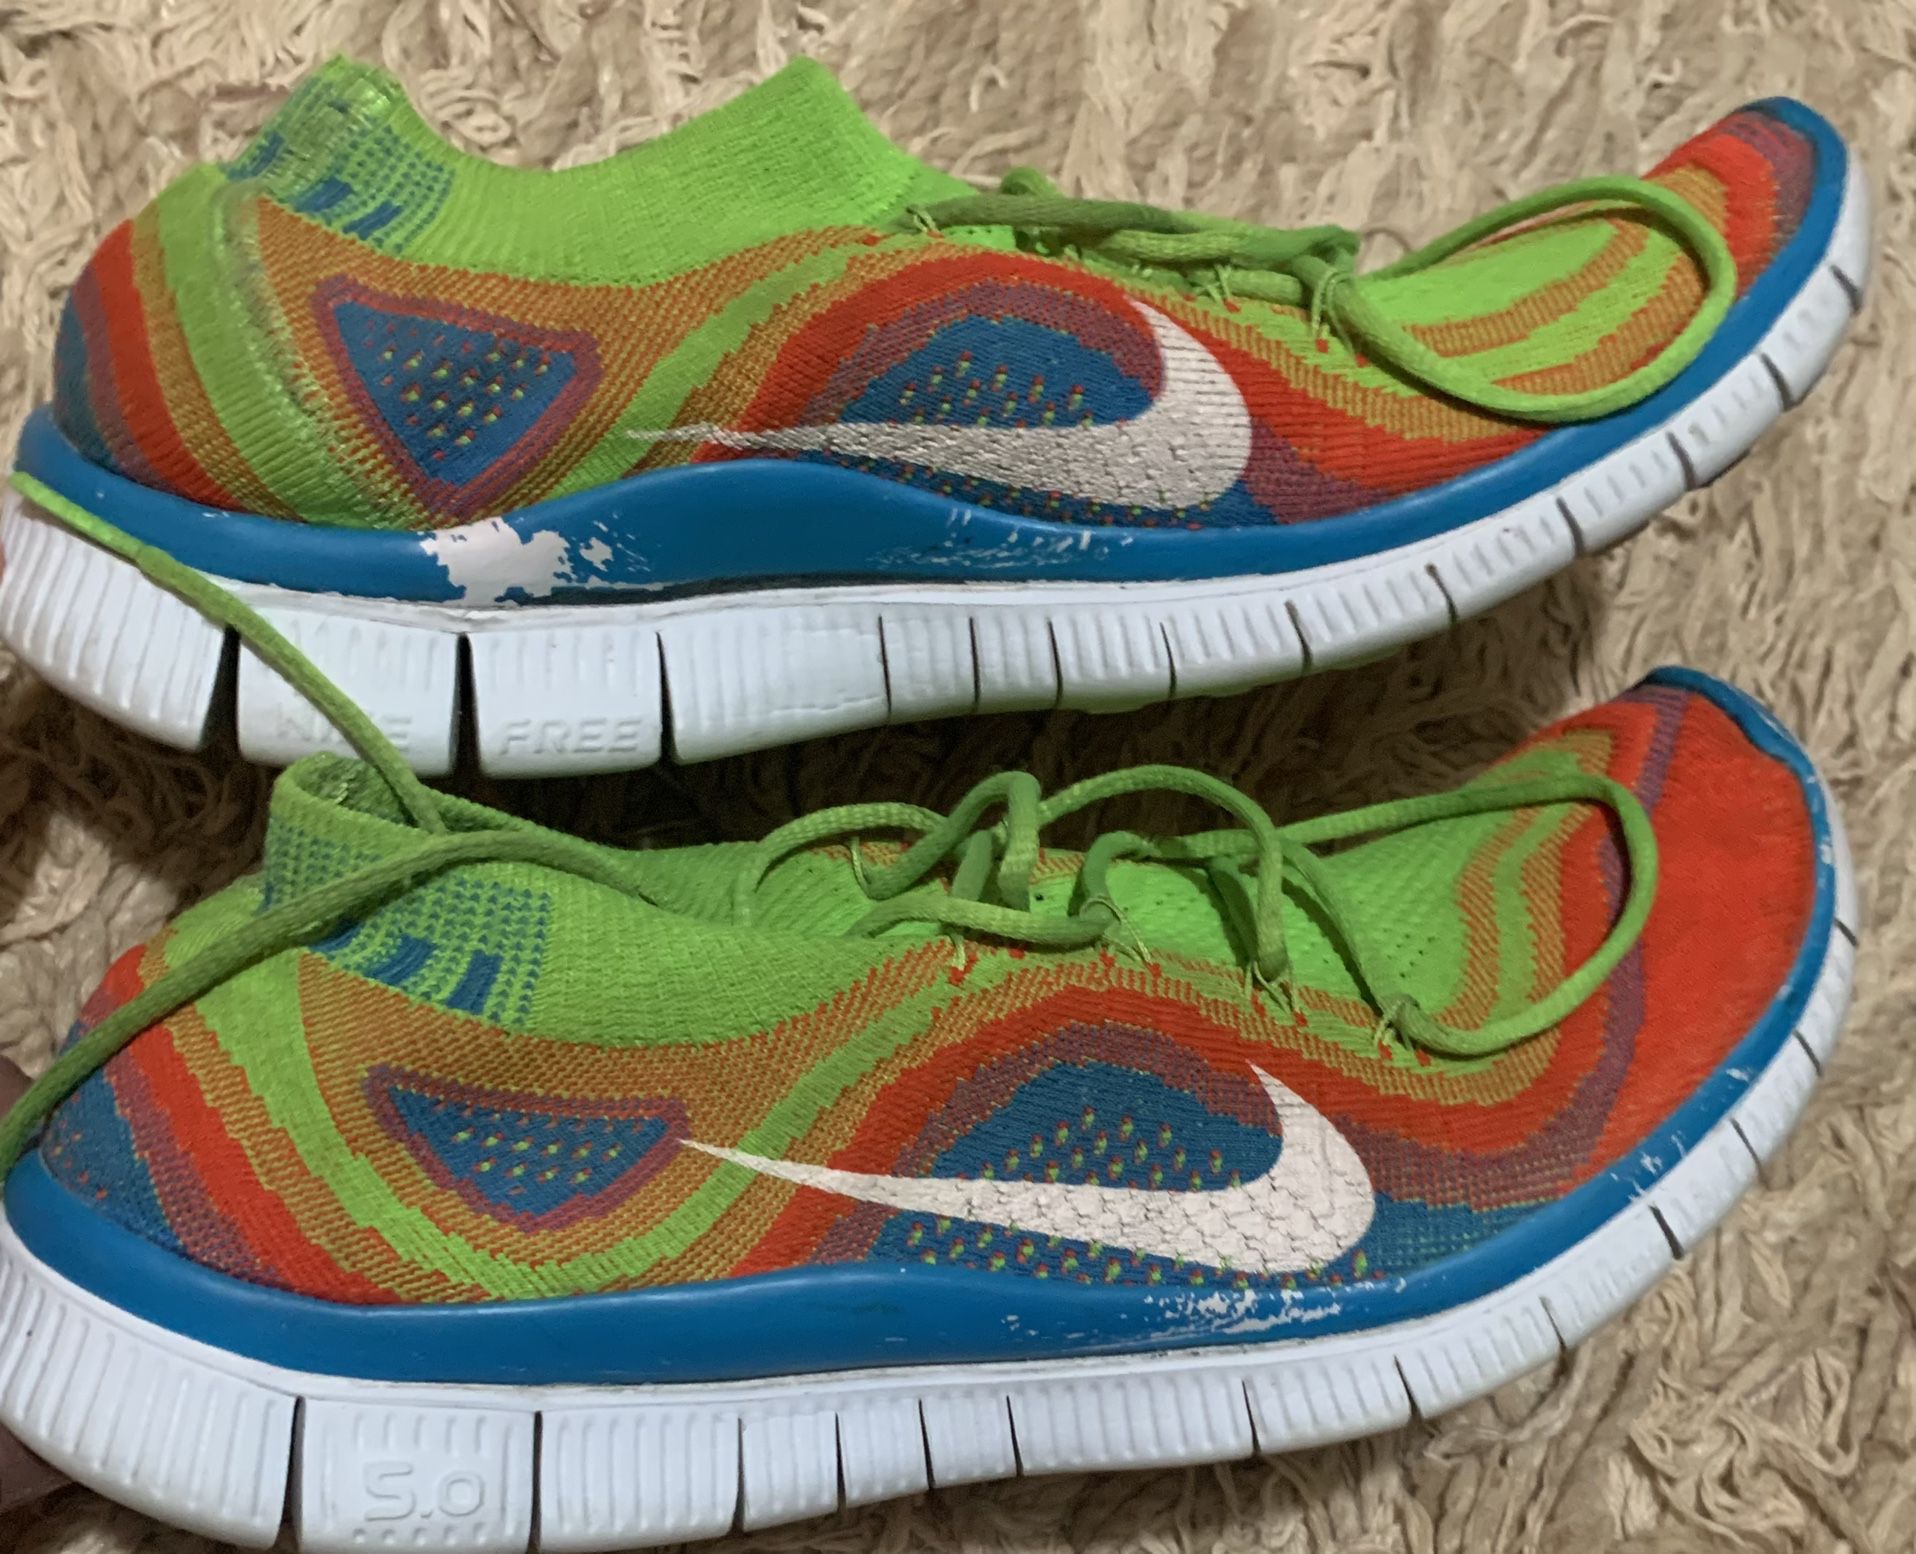 lana cuatro veces presión Nike Free 5.0 Flyknit Running Shoes Electric Green Rainbow 615805-316 Mens  9.5 for Sale in Stafford, VA - OfferUp